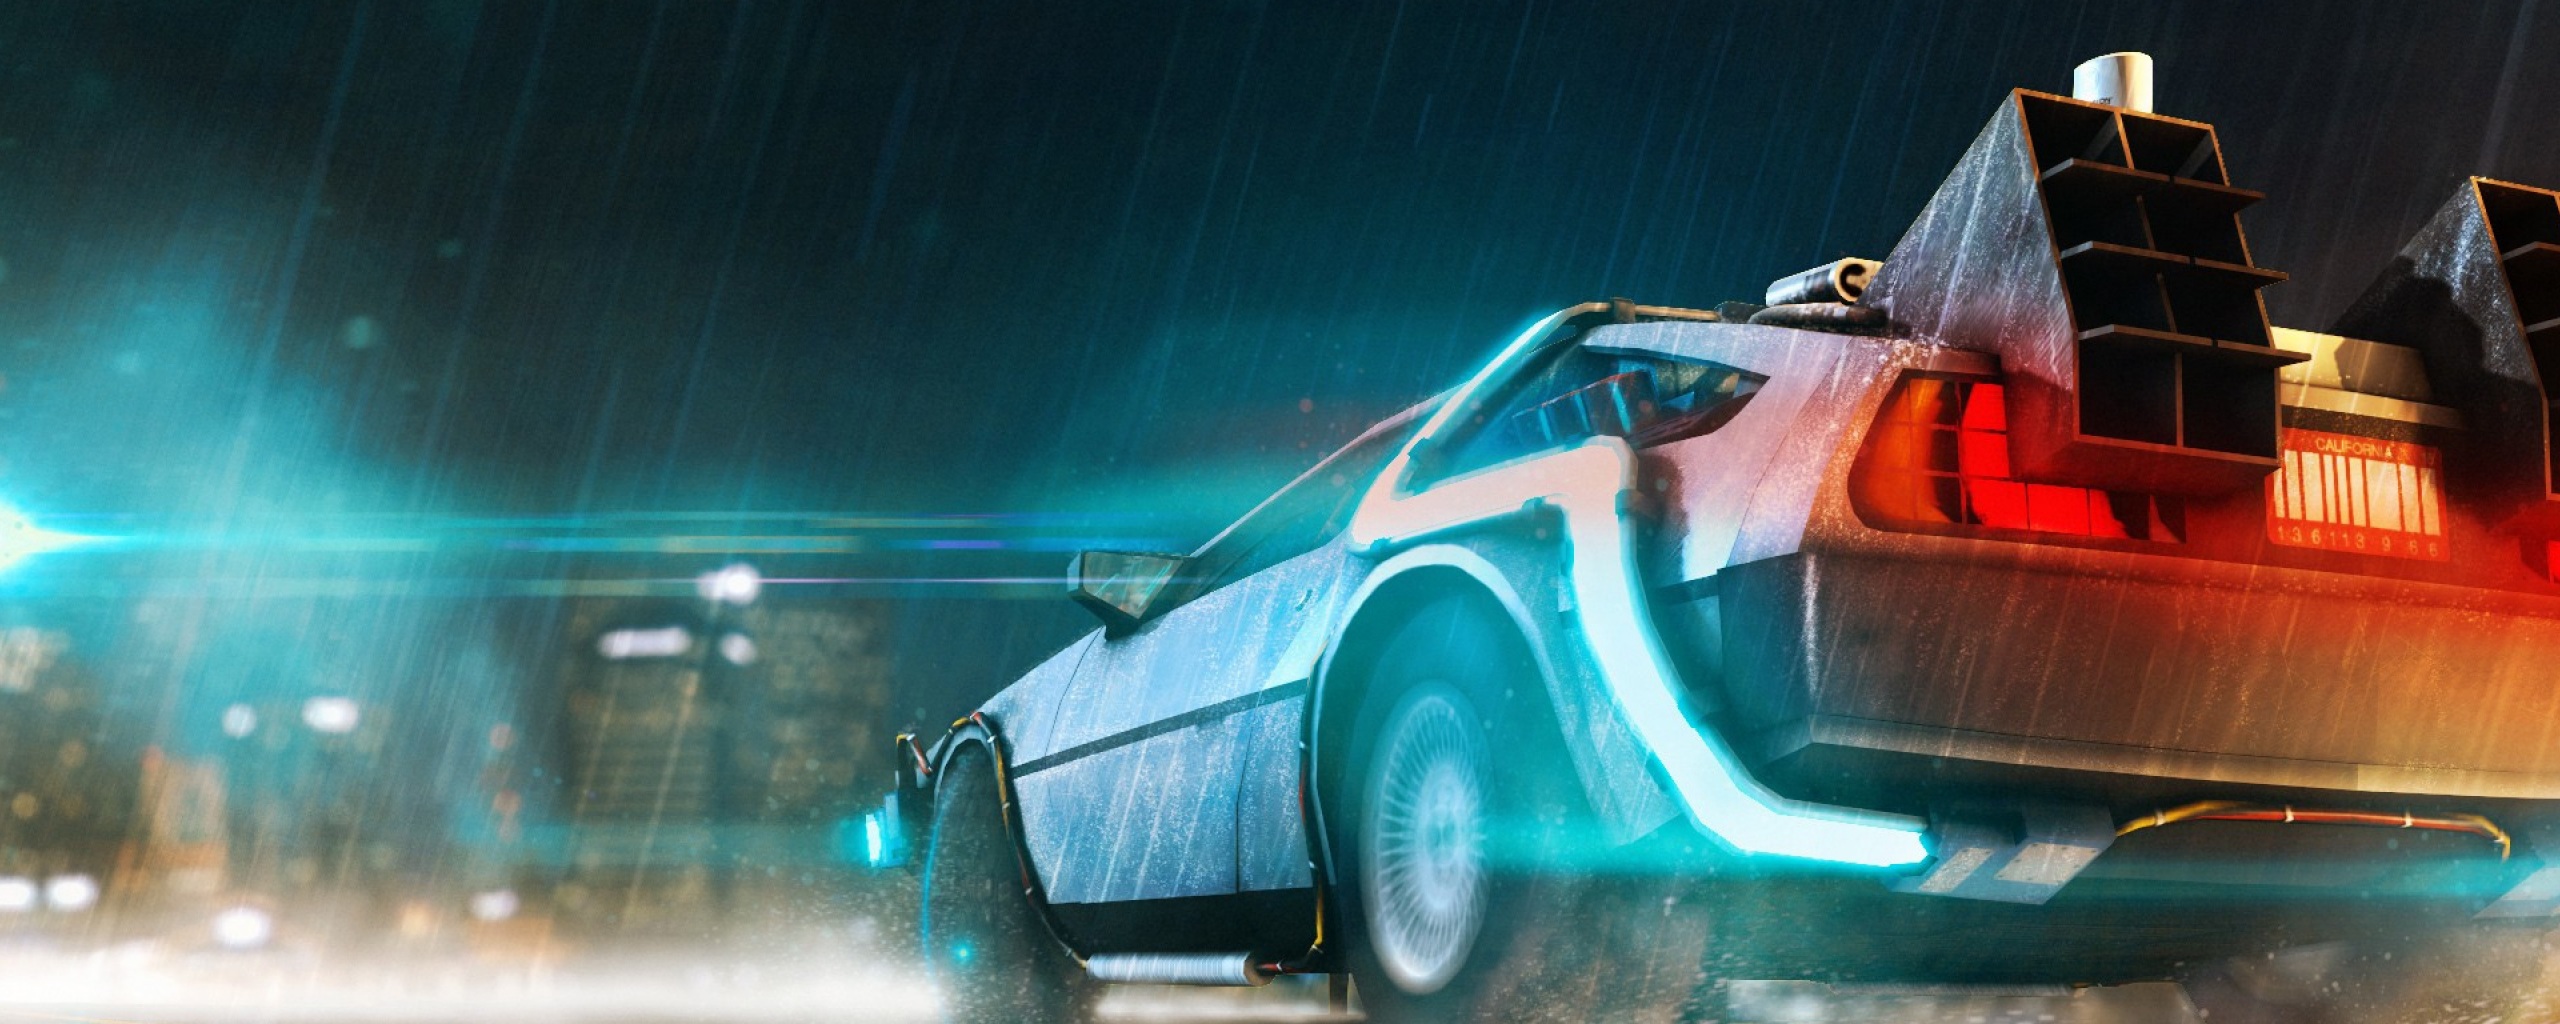 Wallpaper 4k Back To The Future Car